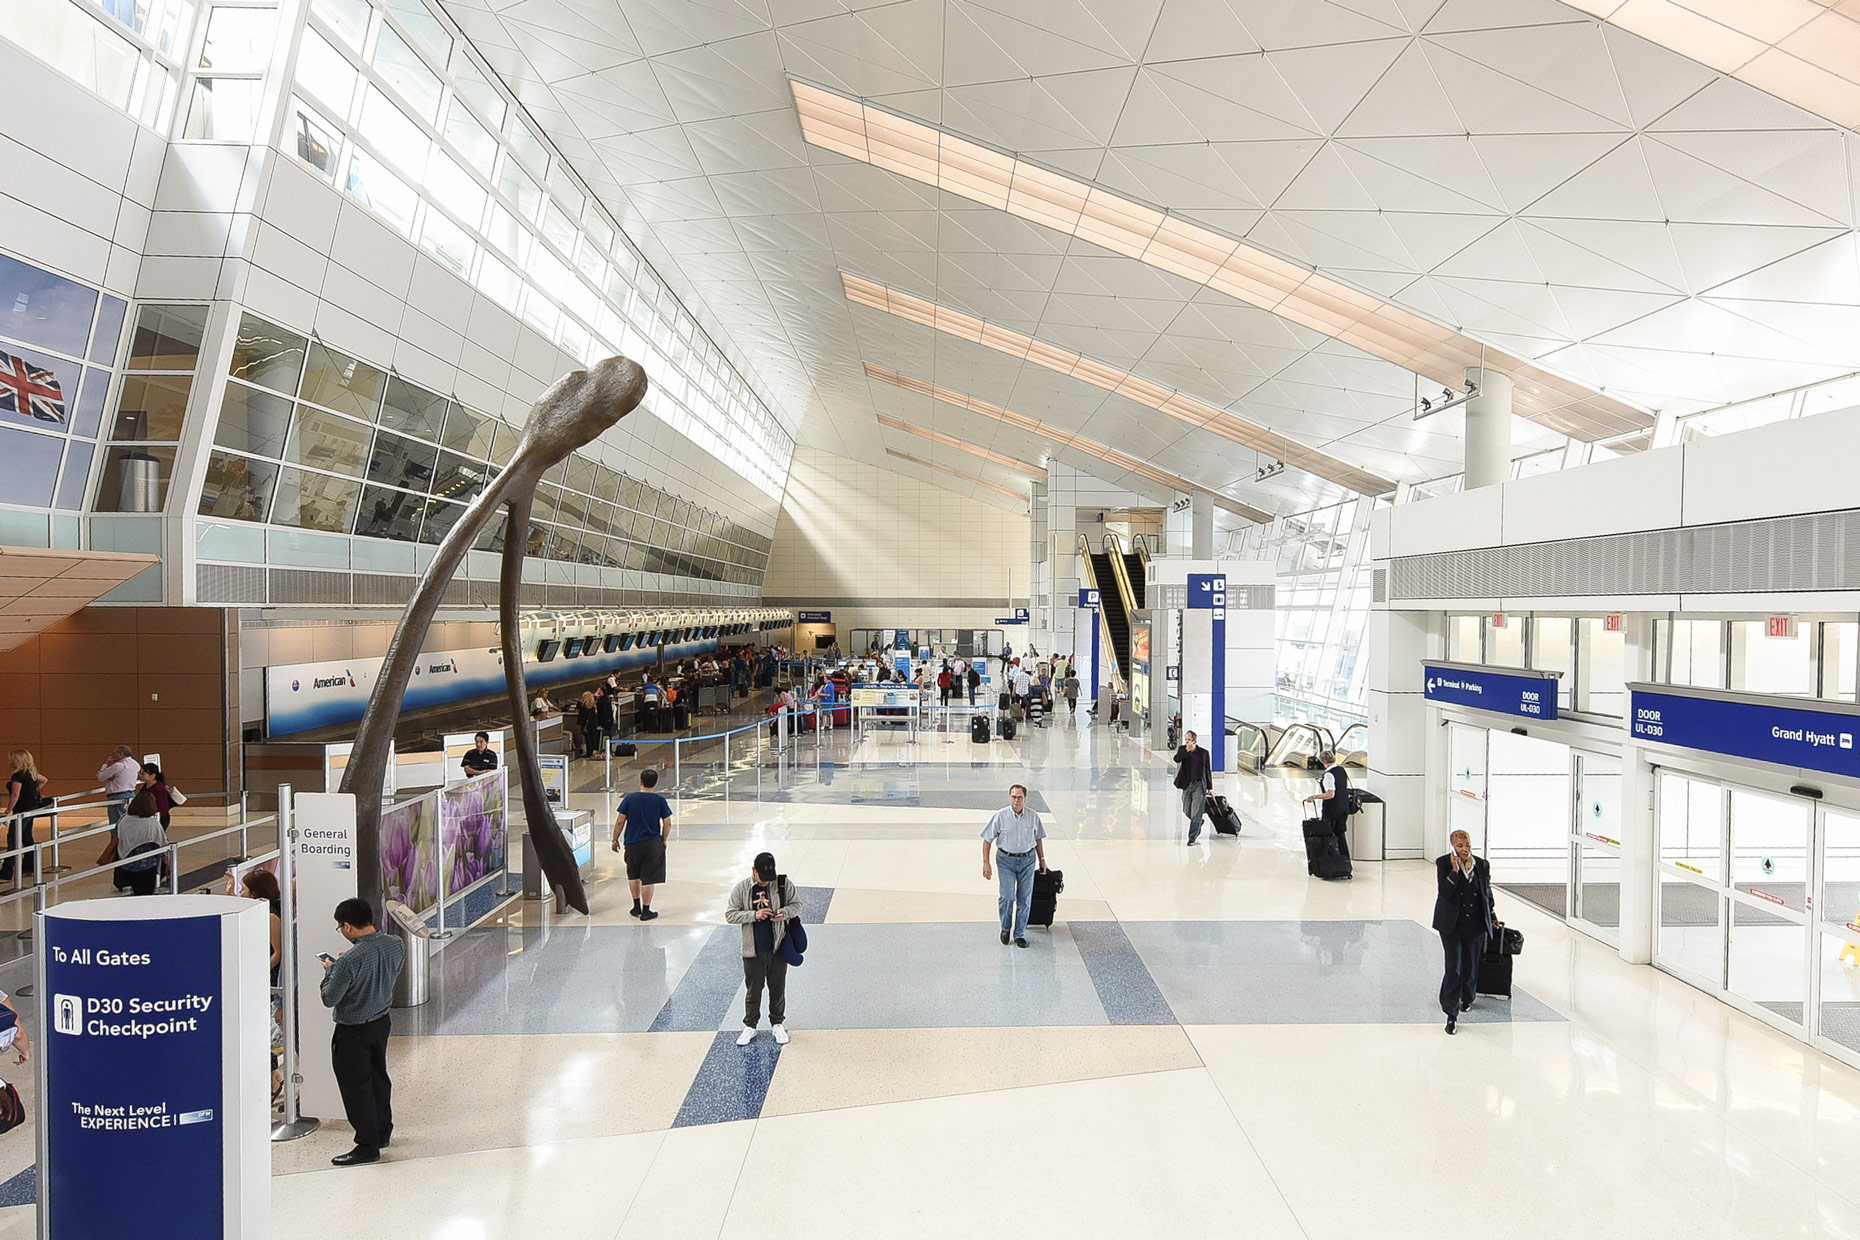 Terminal D at DFW Airport by commercial photographer in Dallas Kevin Brown